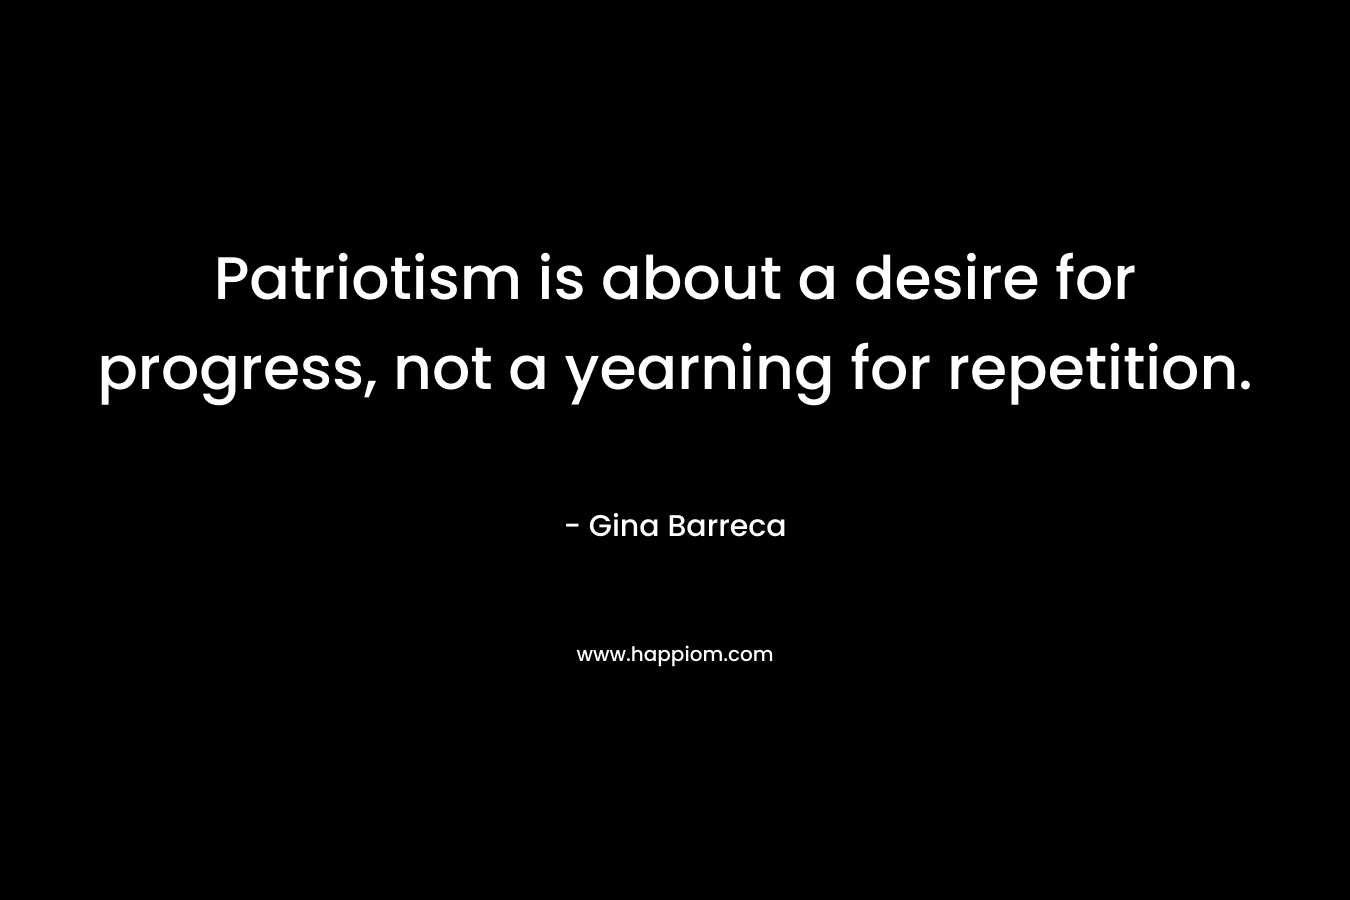 Patriotism is about a desire for progress, not a yearning for repetition.